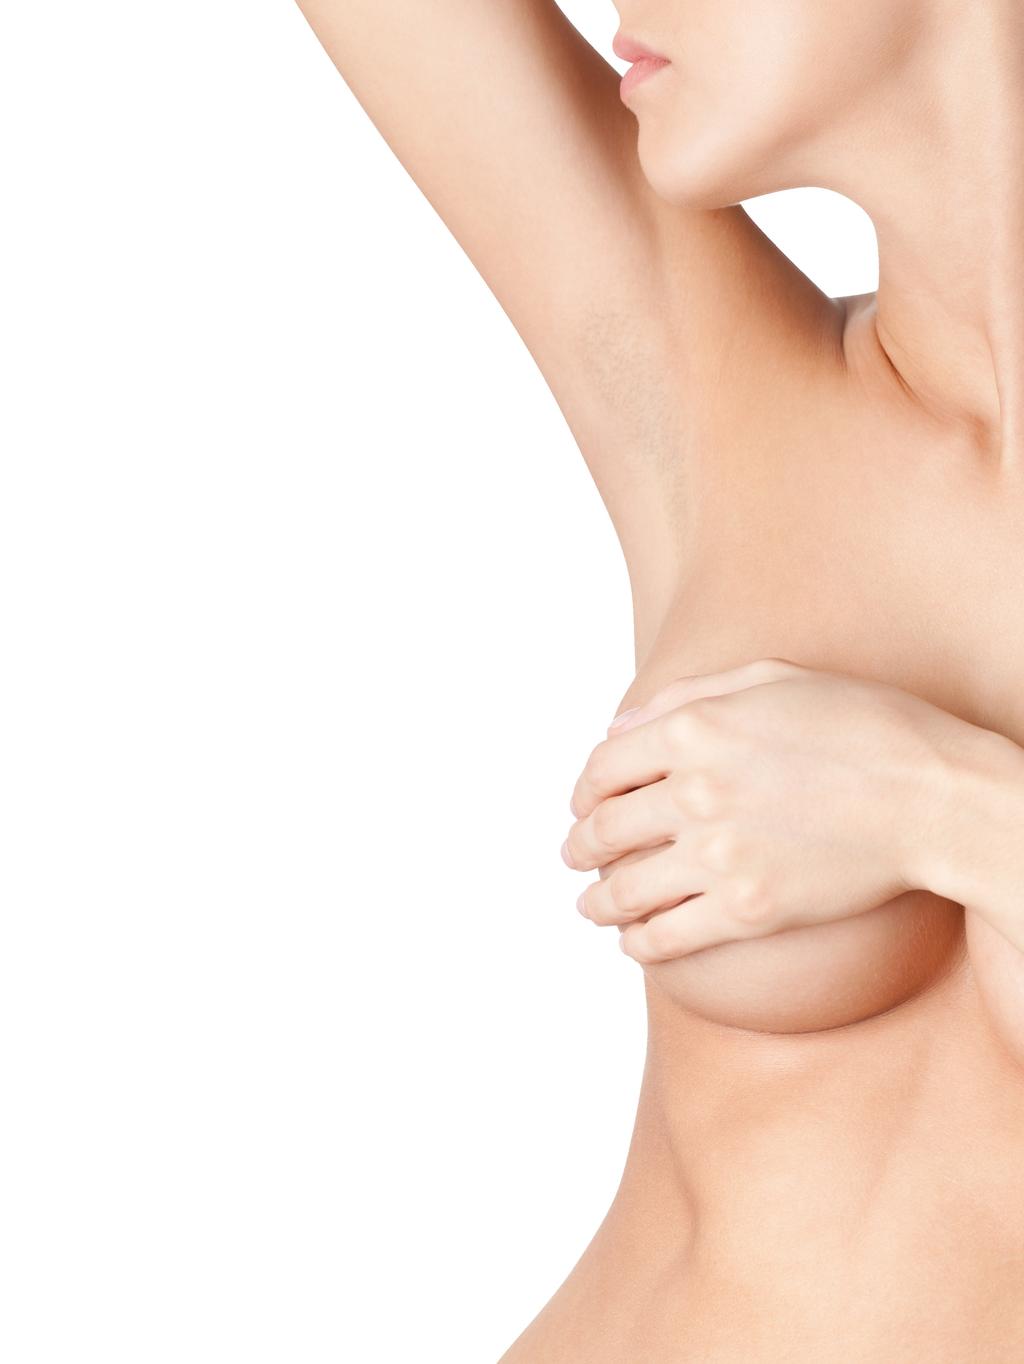 Recovery What to Expect Feeling tired and mild soreness following breast augmentation surgery are common.